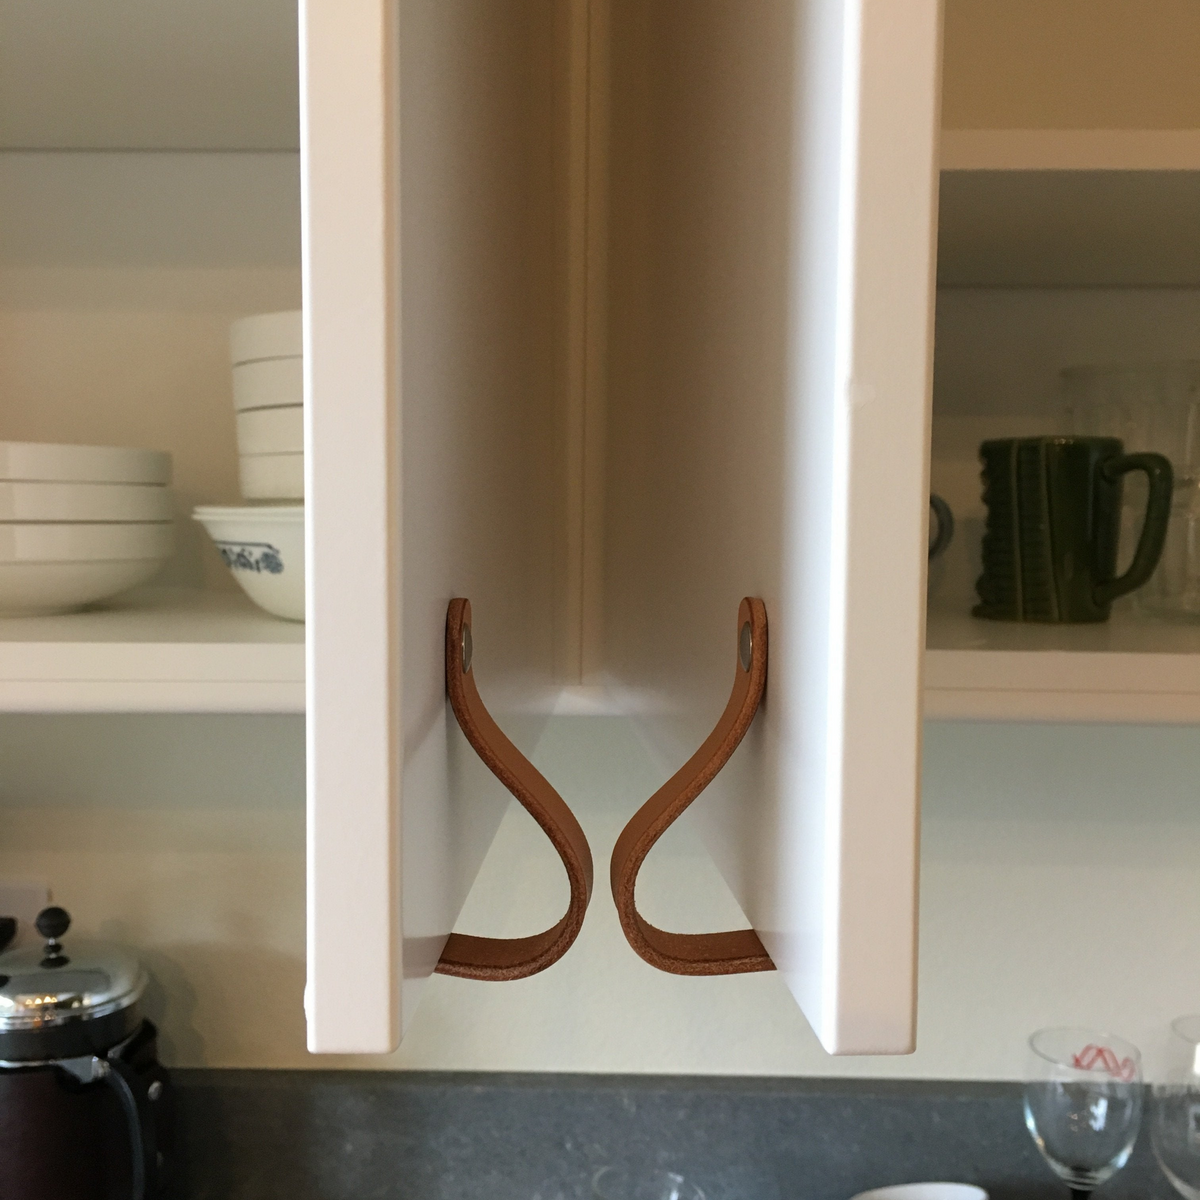 Two cabinet doors opening onto each other with leather handles. The picture shows that the leather handles hit each other first, which act as a bumper and prevents gouging in awkward corners. 